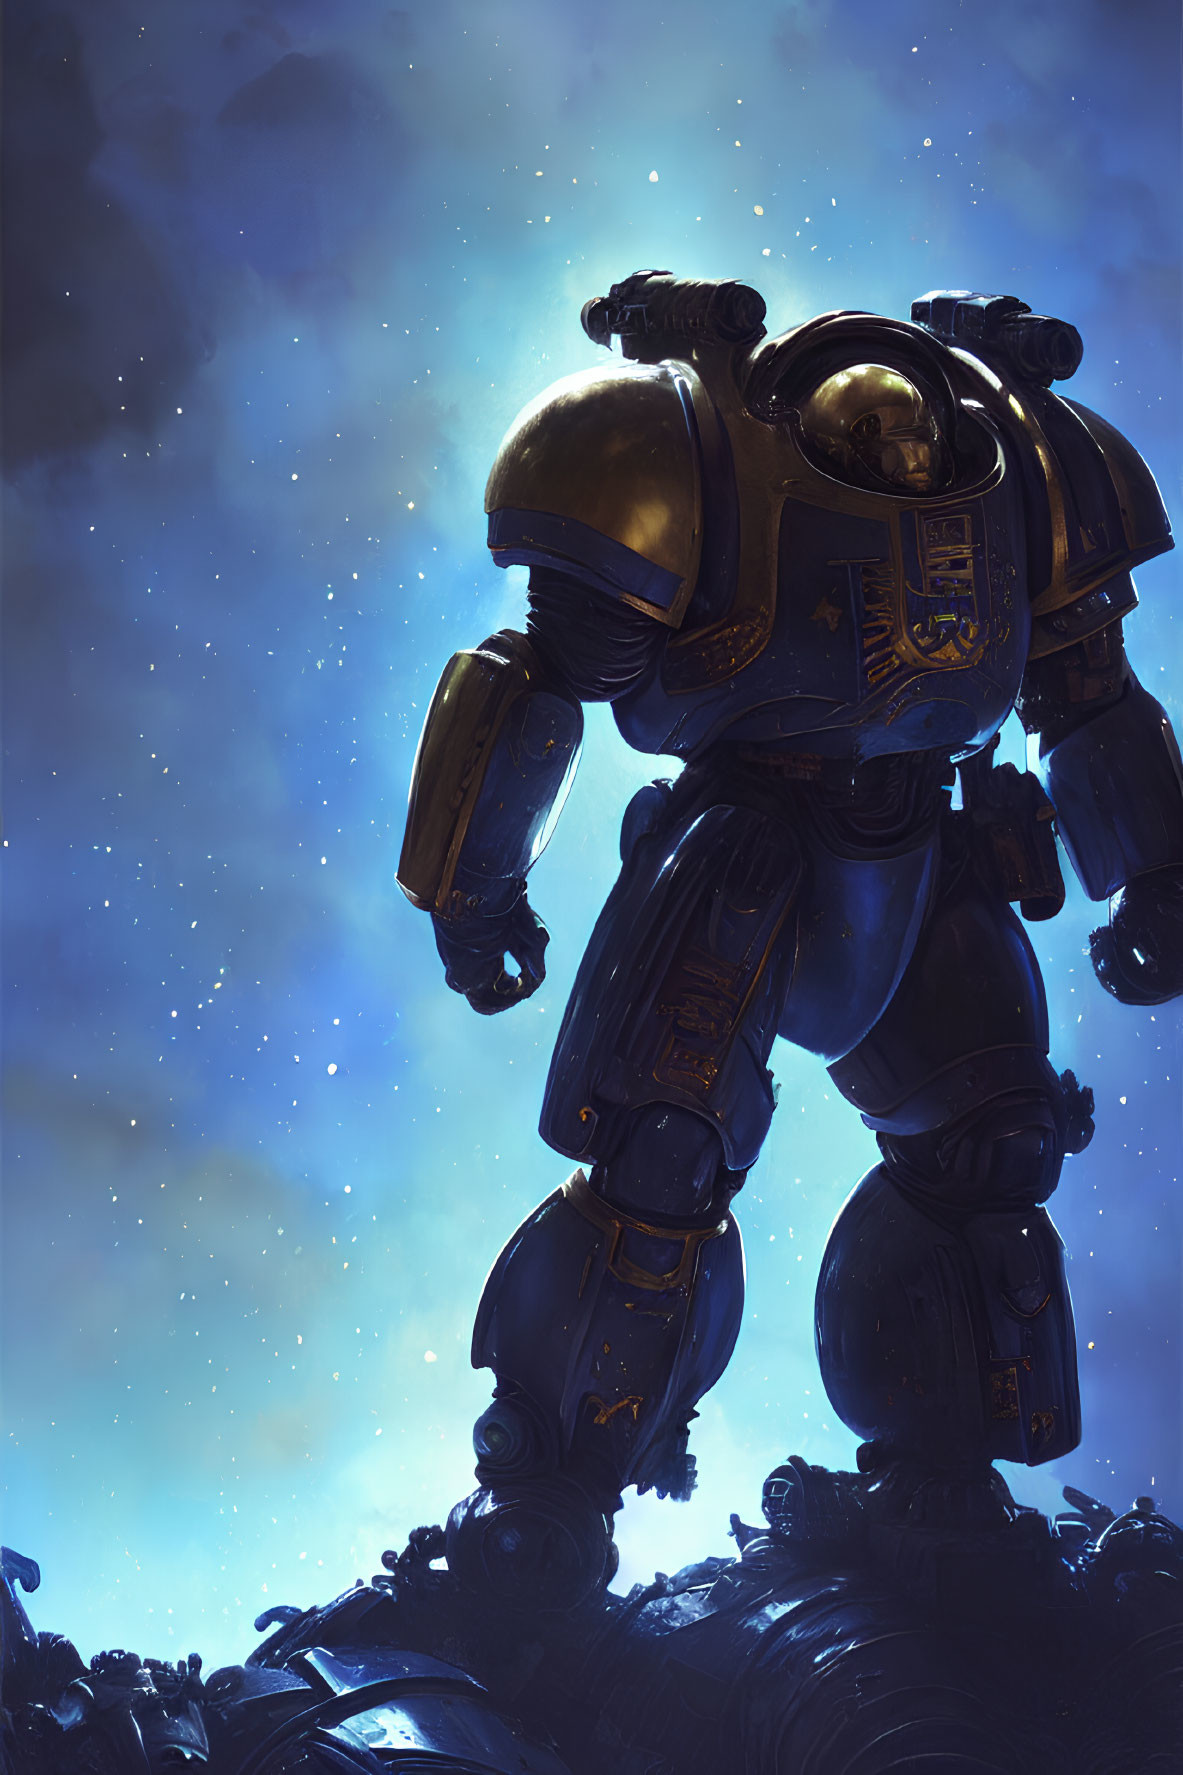 Towering Robotic Figure in Blue and Gold Armor Against Starry Sky